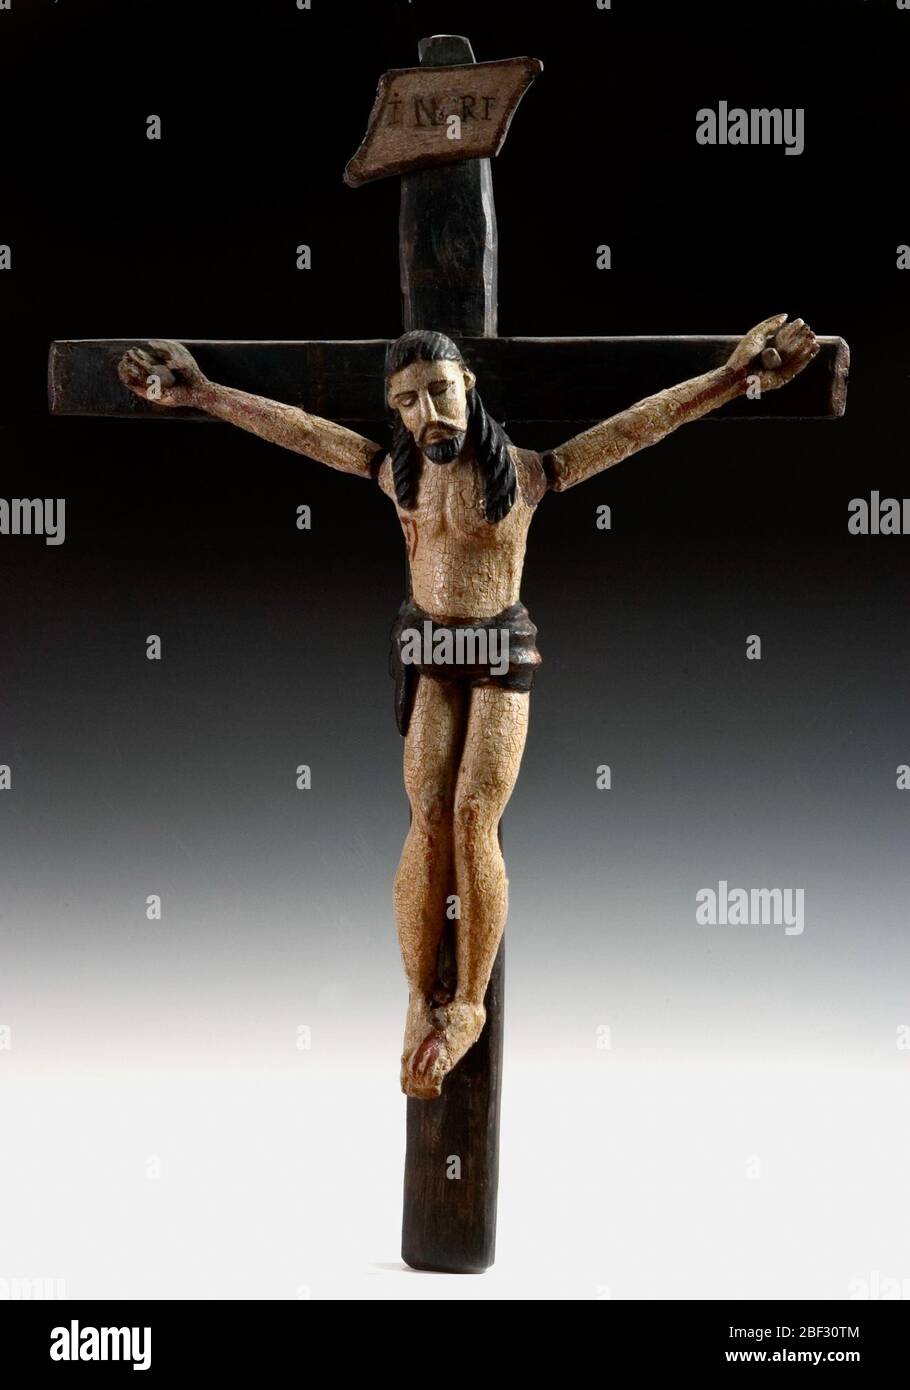 Crucifijo. Carvings of the crucified Christ were popular subjects of santeros, artists who created santos, carved wooden images of saints. In this figure, Christ’s limp body looks as if it is shifting, emphasizing the excruciating pain of having his hands and feet nailed to the cross. Stock Photo